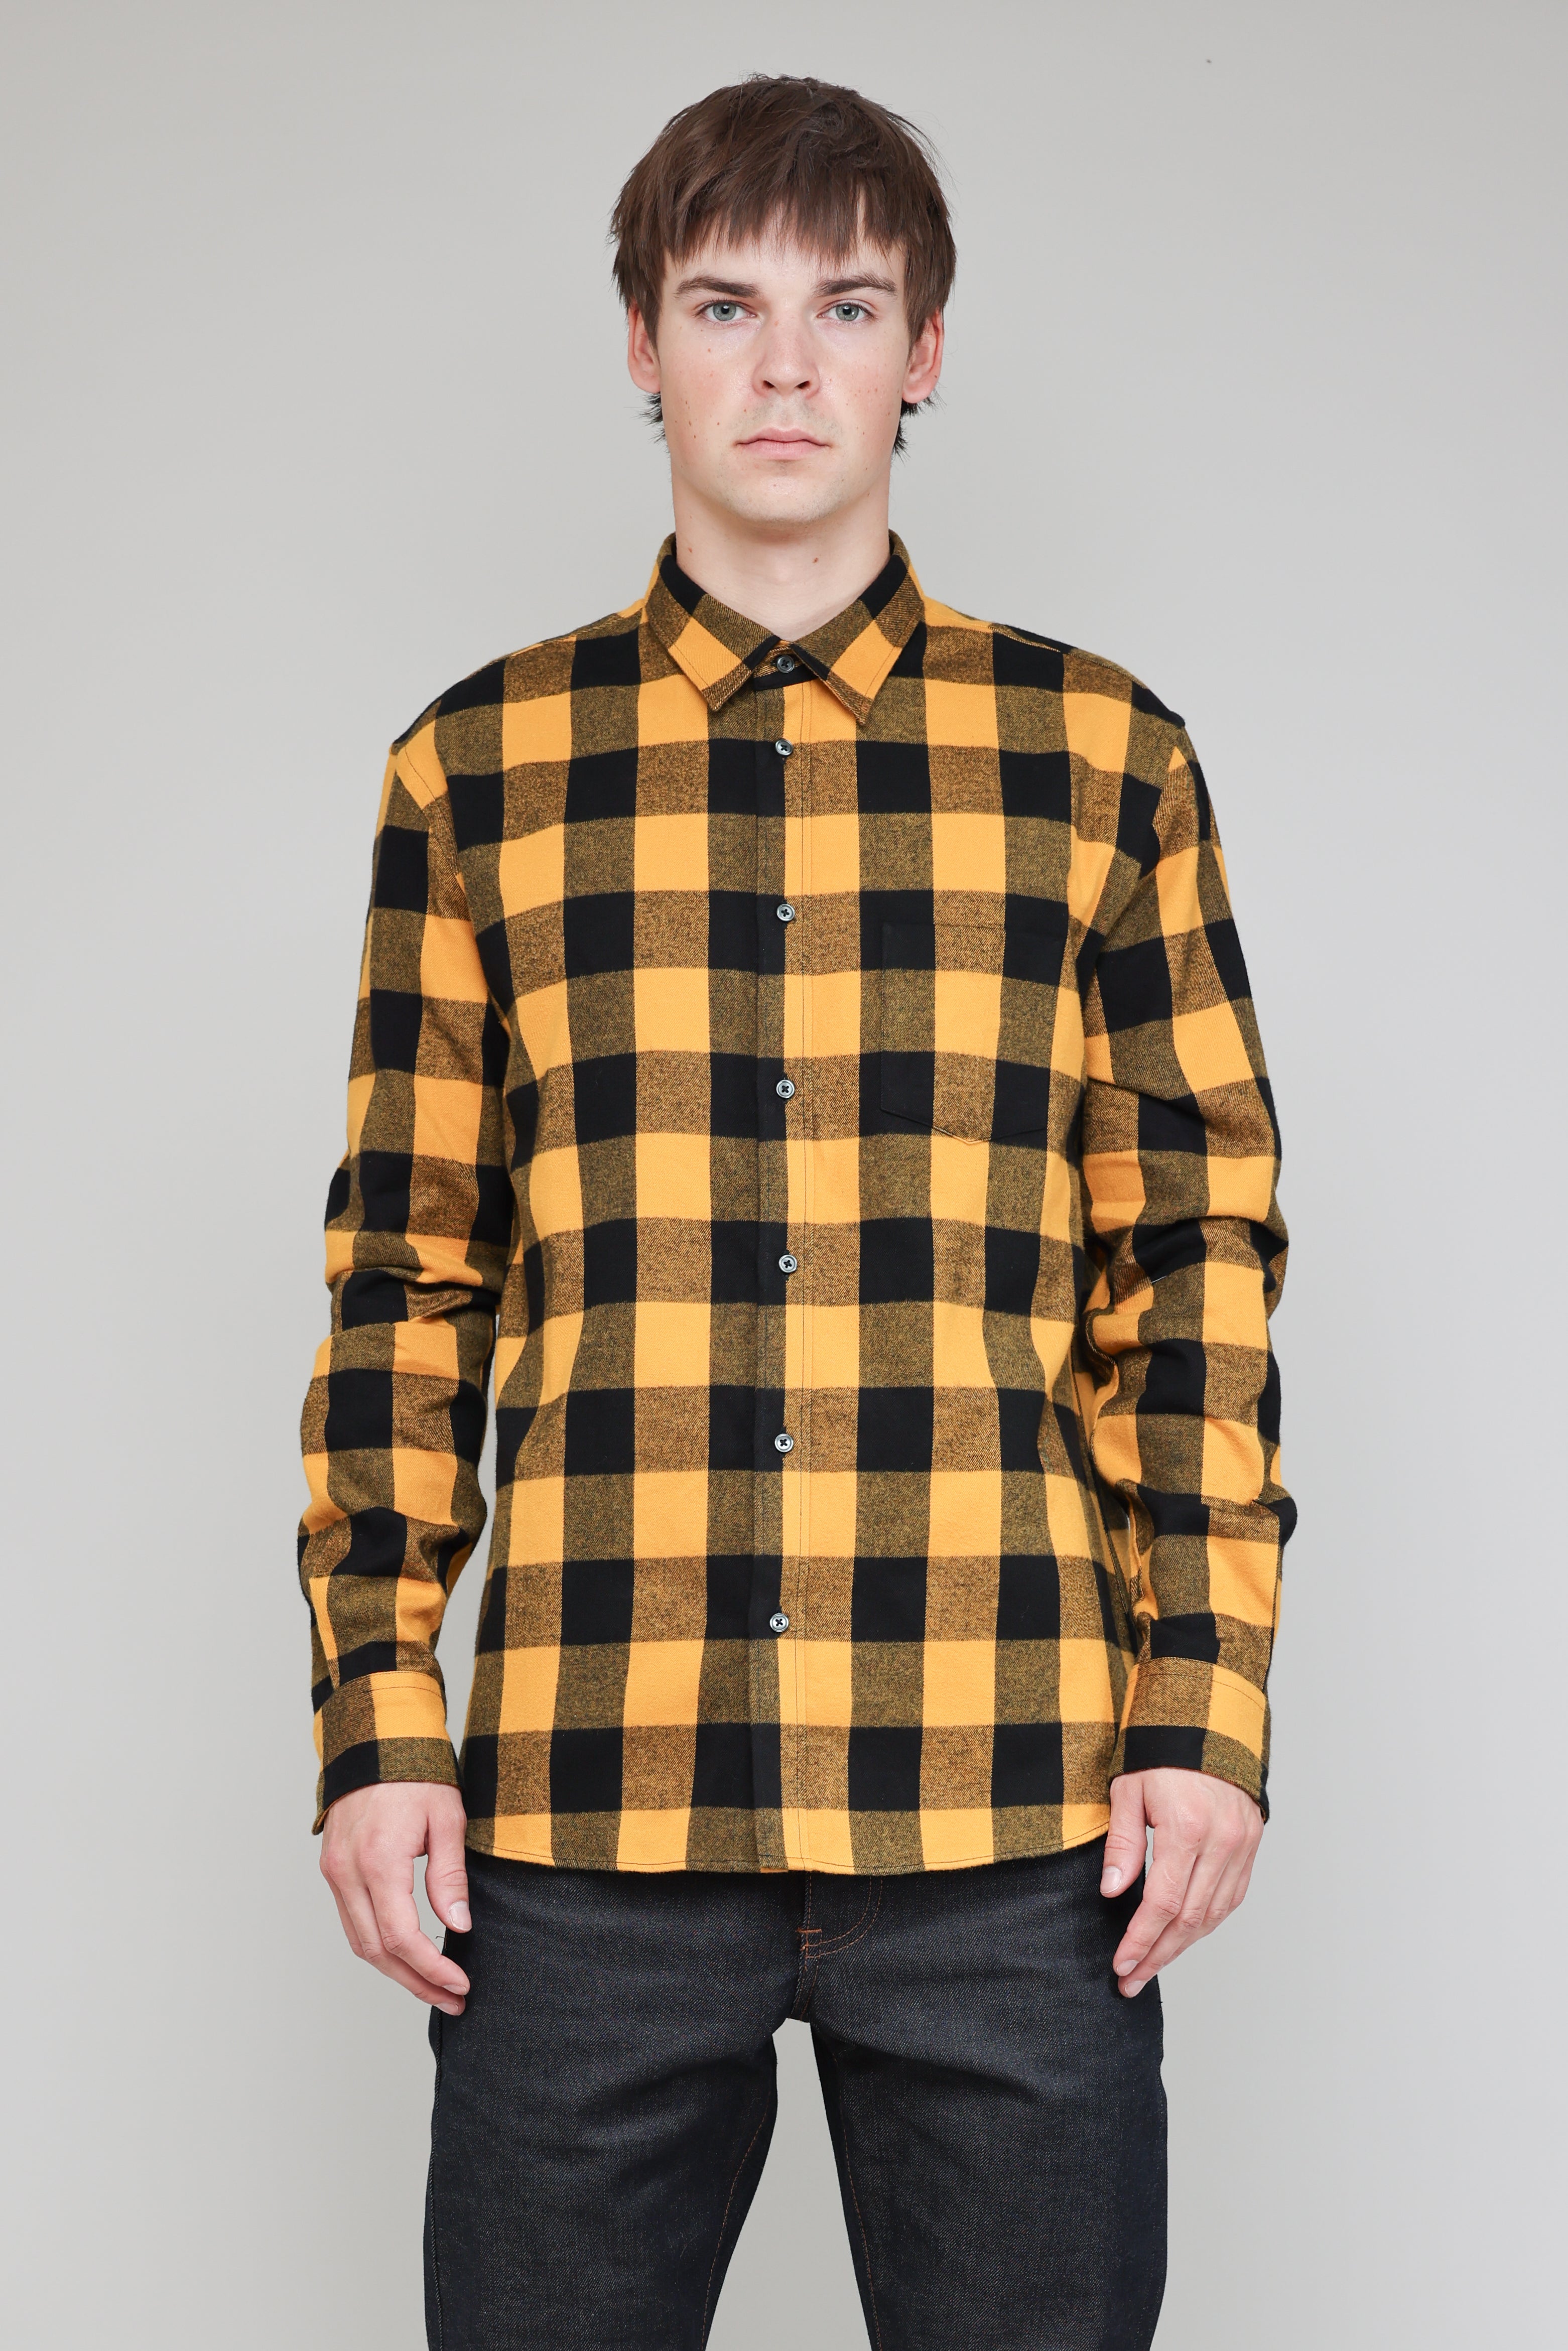 Japanese Brushed Buffalo Plaid in Yellow and Black 02